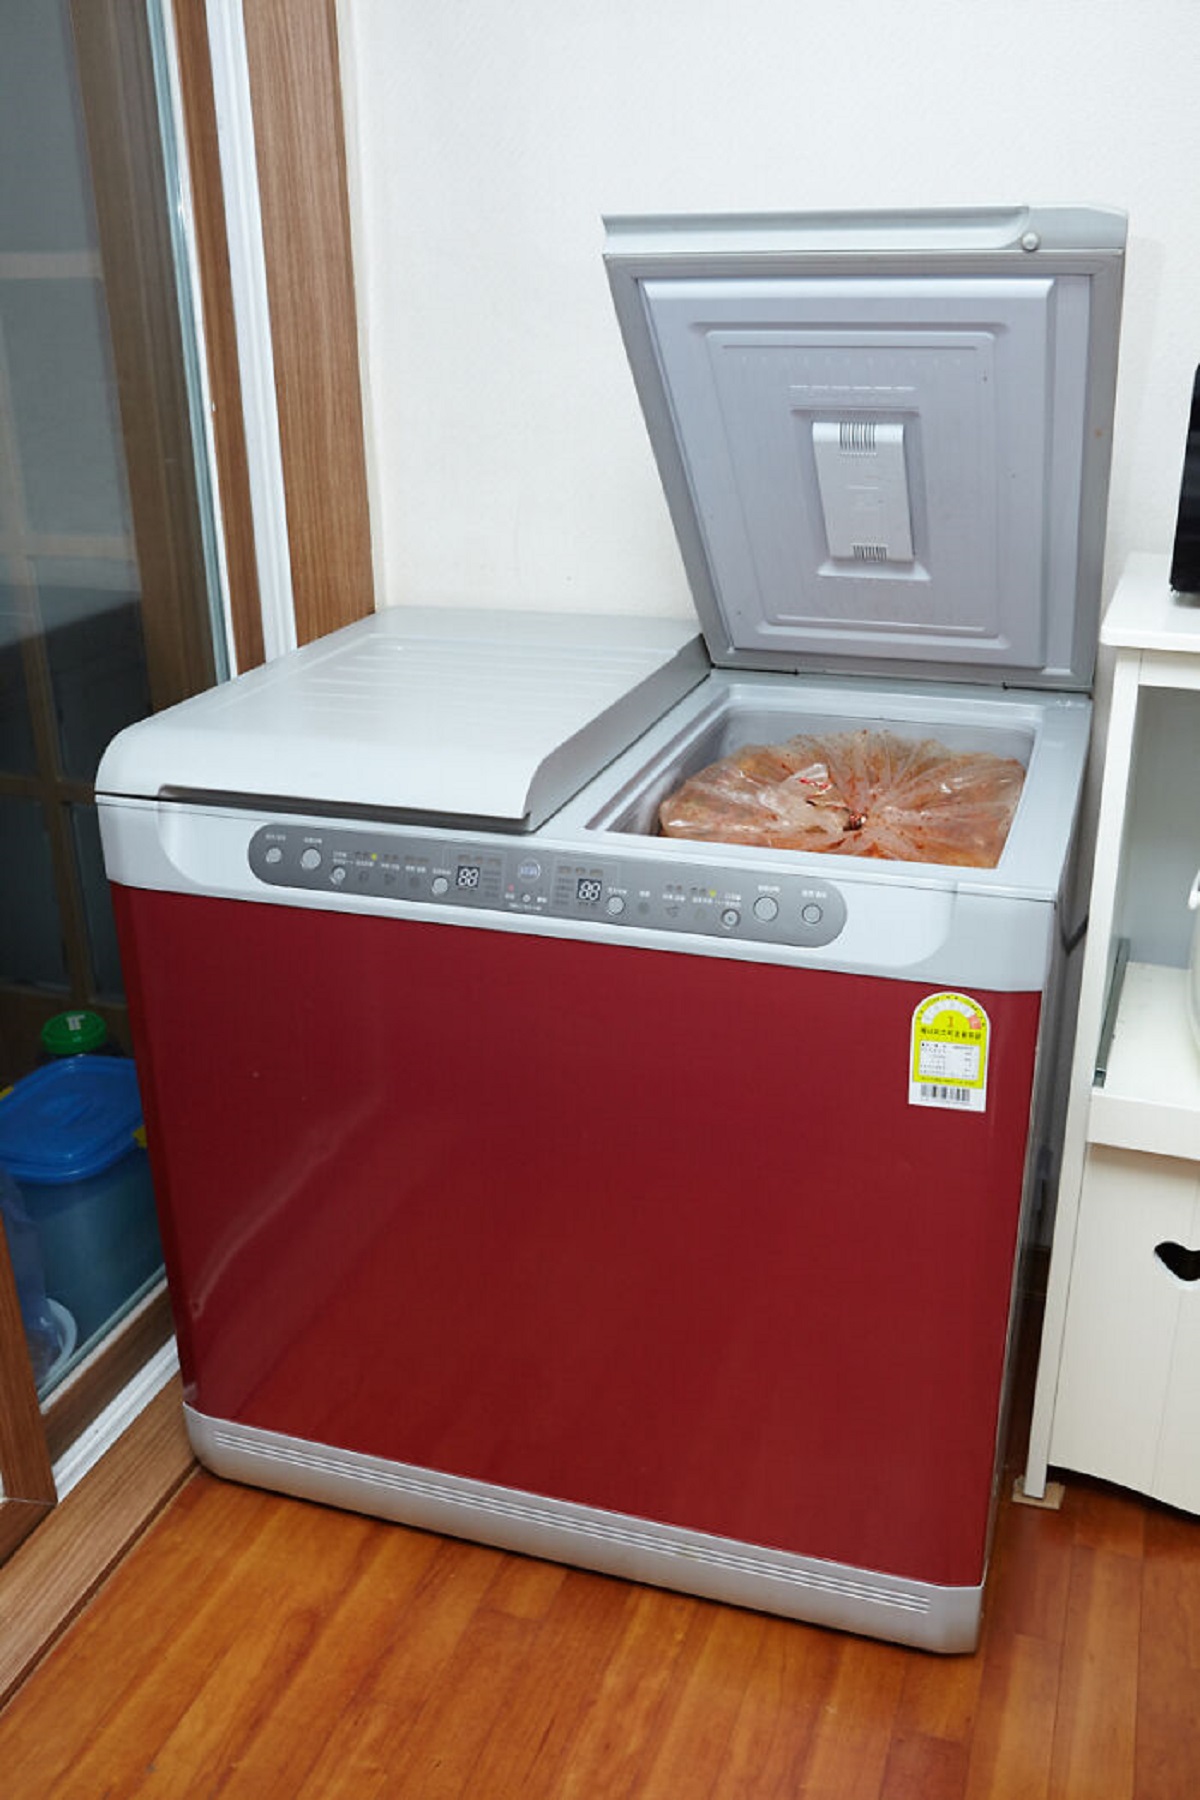 Over 98% of Korean households have a special kimchi fridge